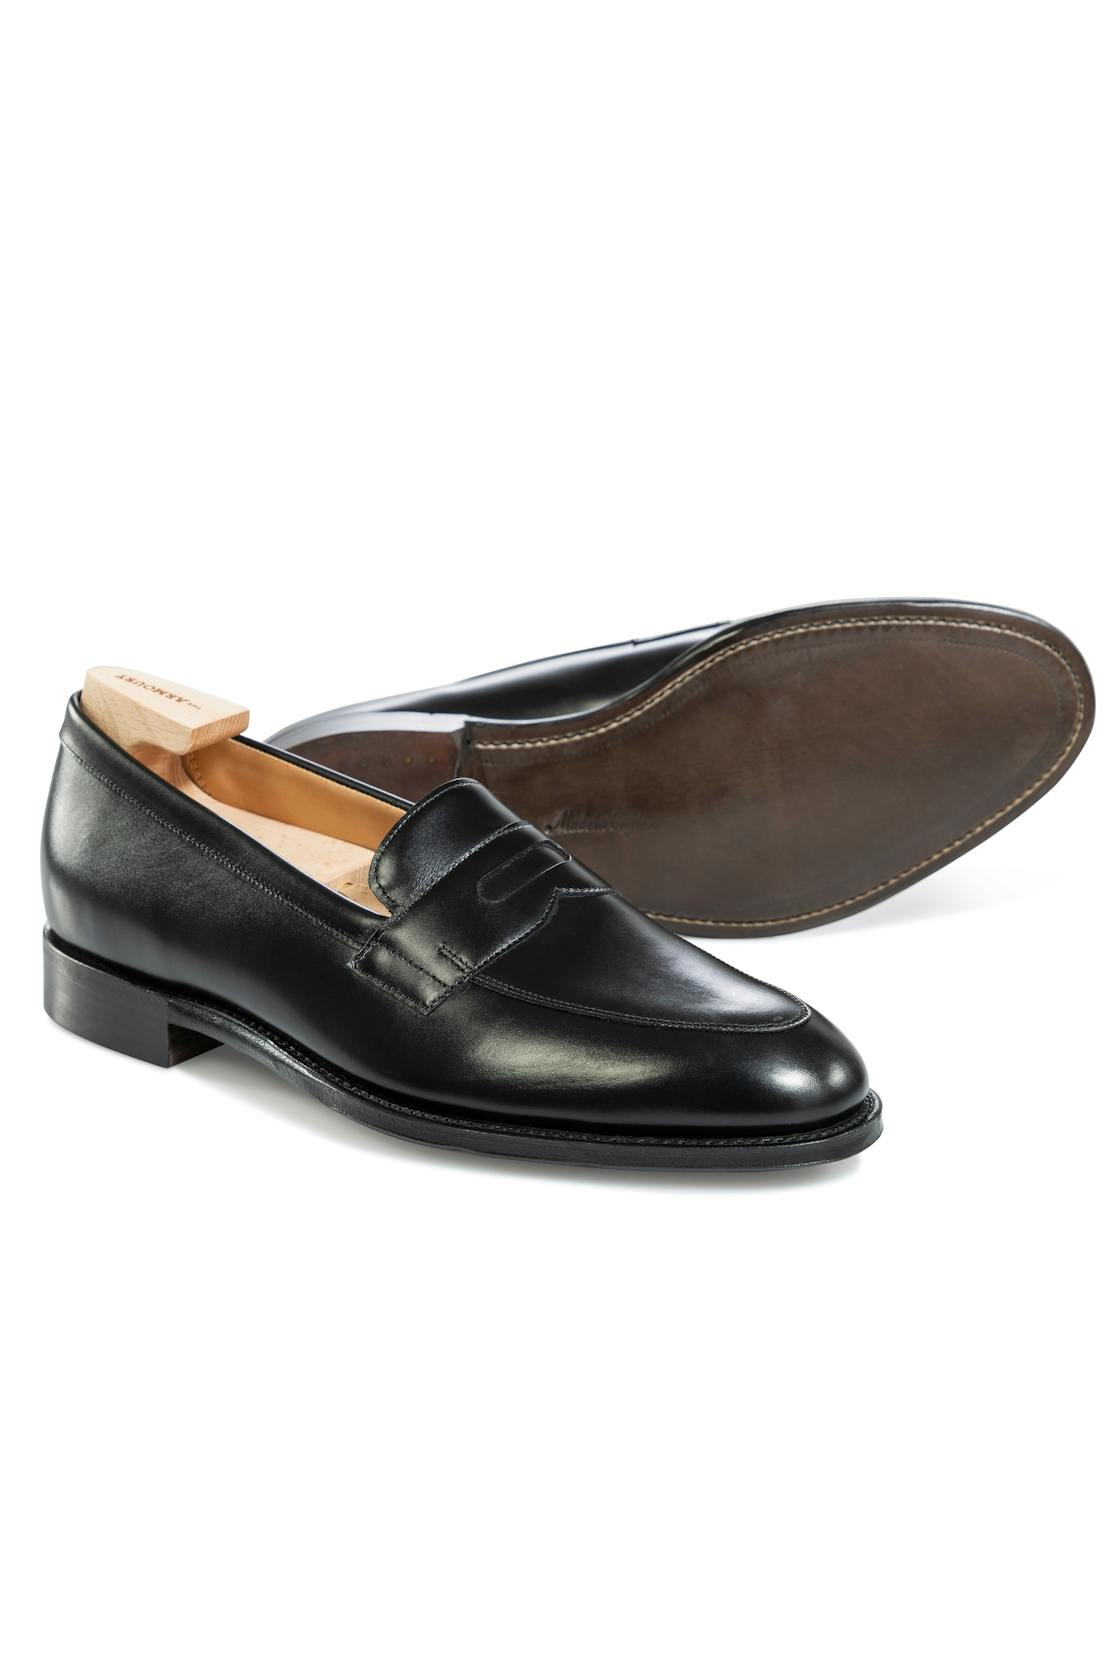 The Armoury Duane II Black Calf Penny Loafers *factory seconds*